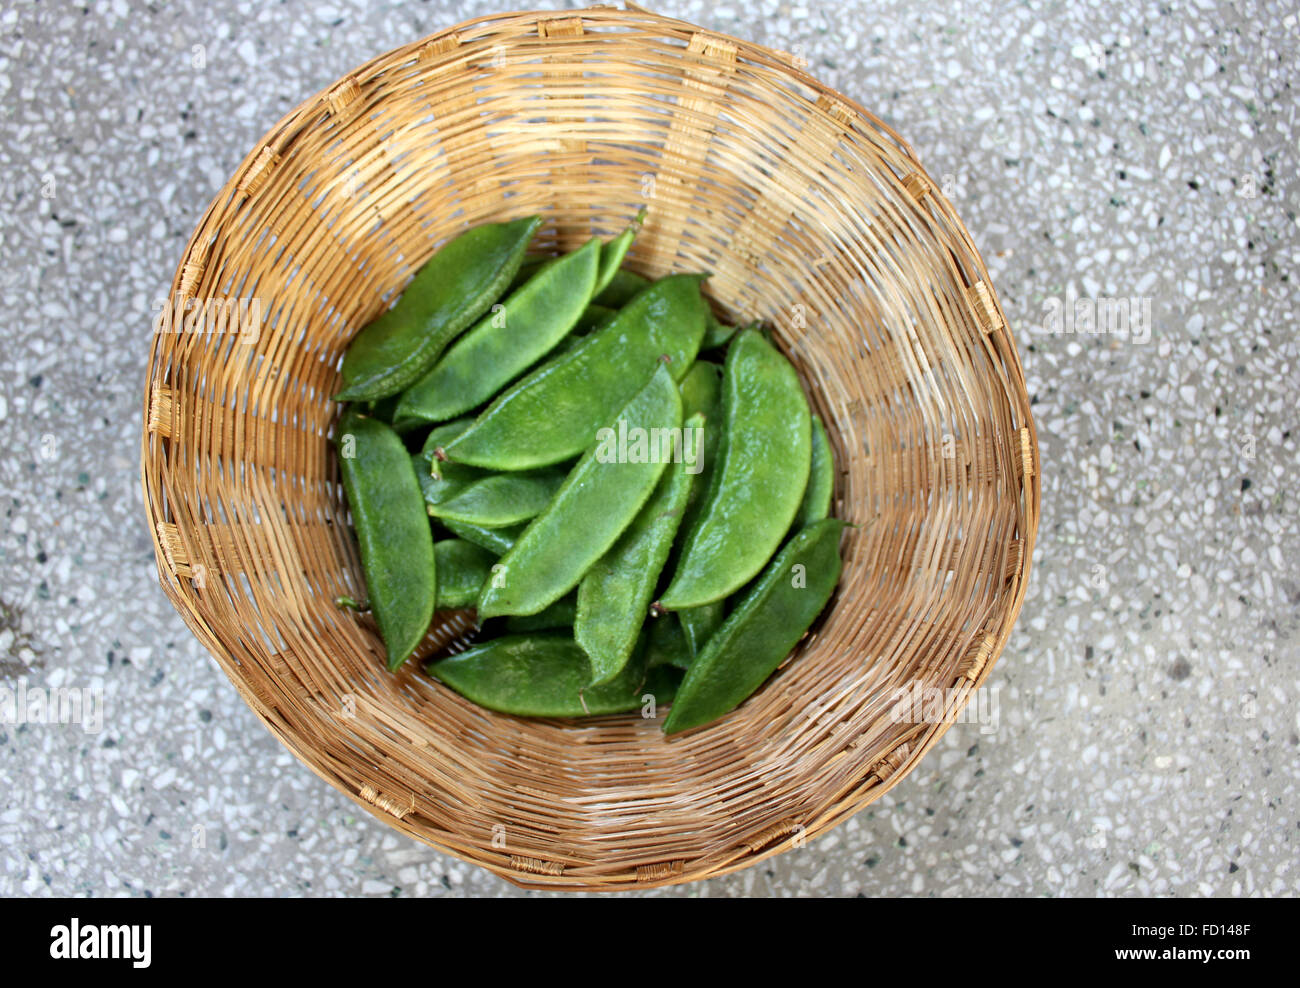 Dolichos lablab, vegetable vine crop with white flowers, unopened pods in a basket, used as vegetable, ripe seeds as pulse Stock Photo